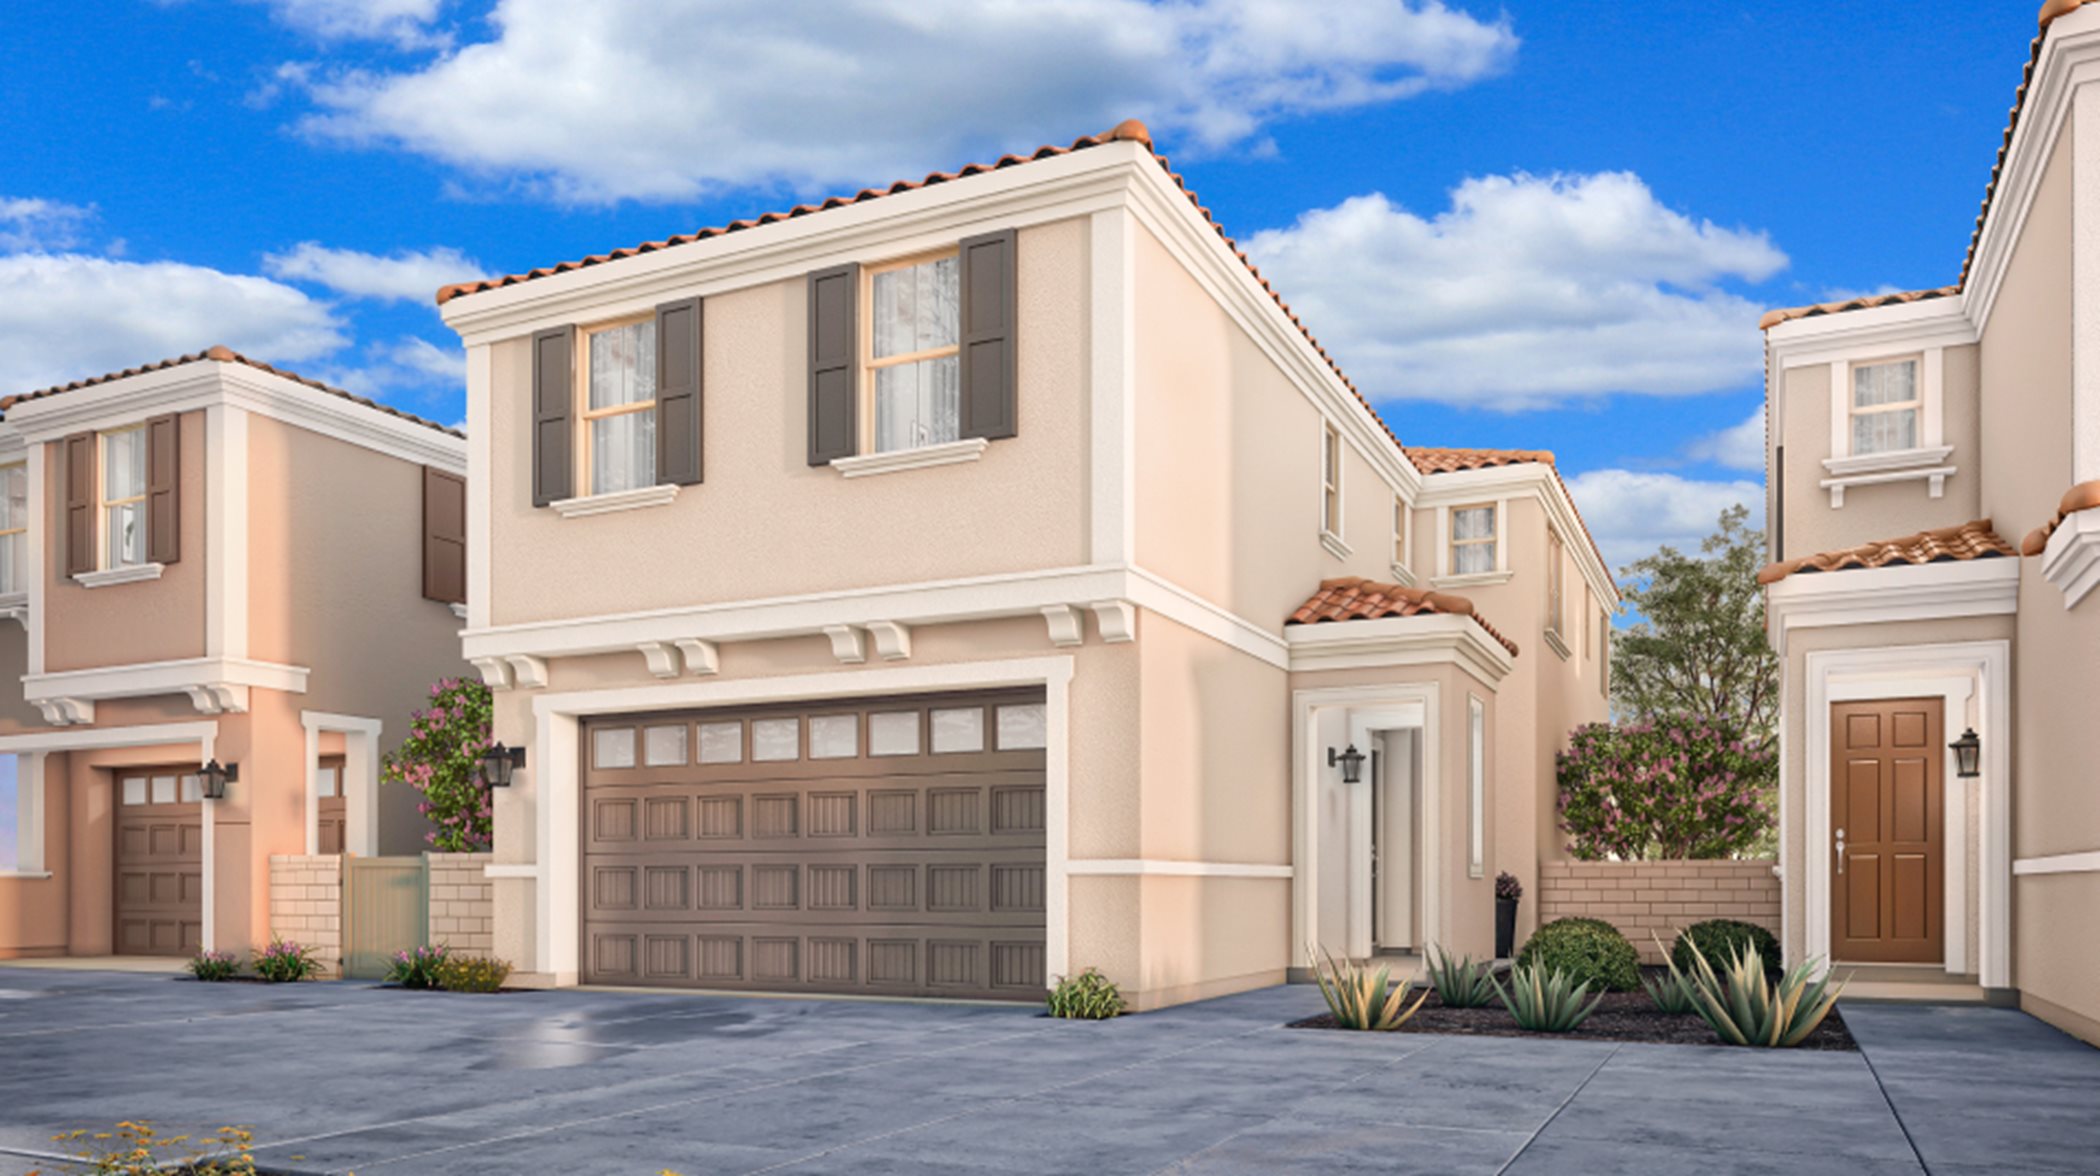 Italianate-style home exterior rendering